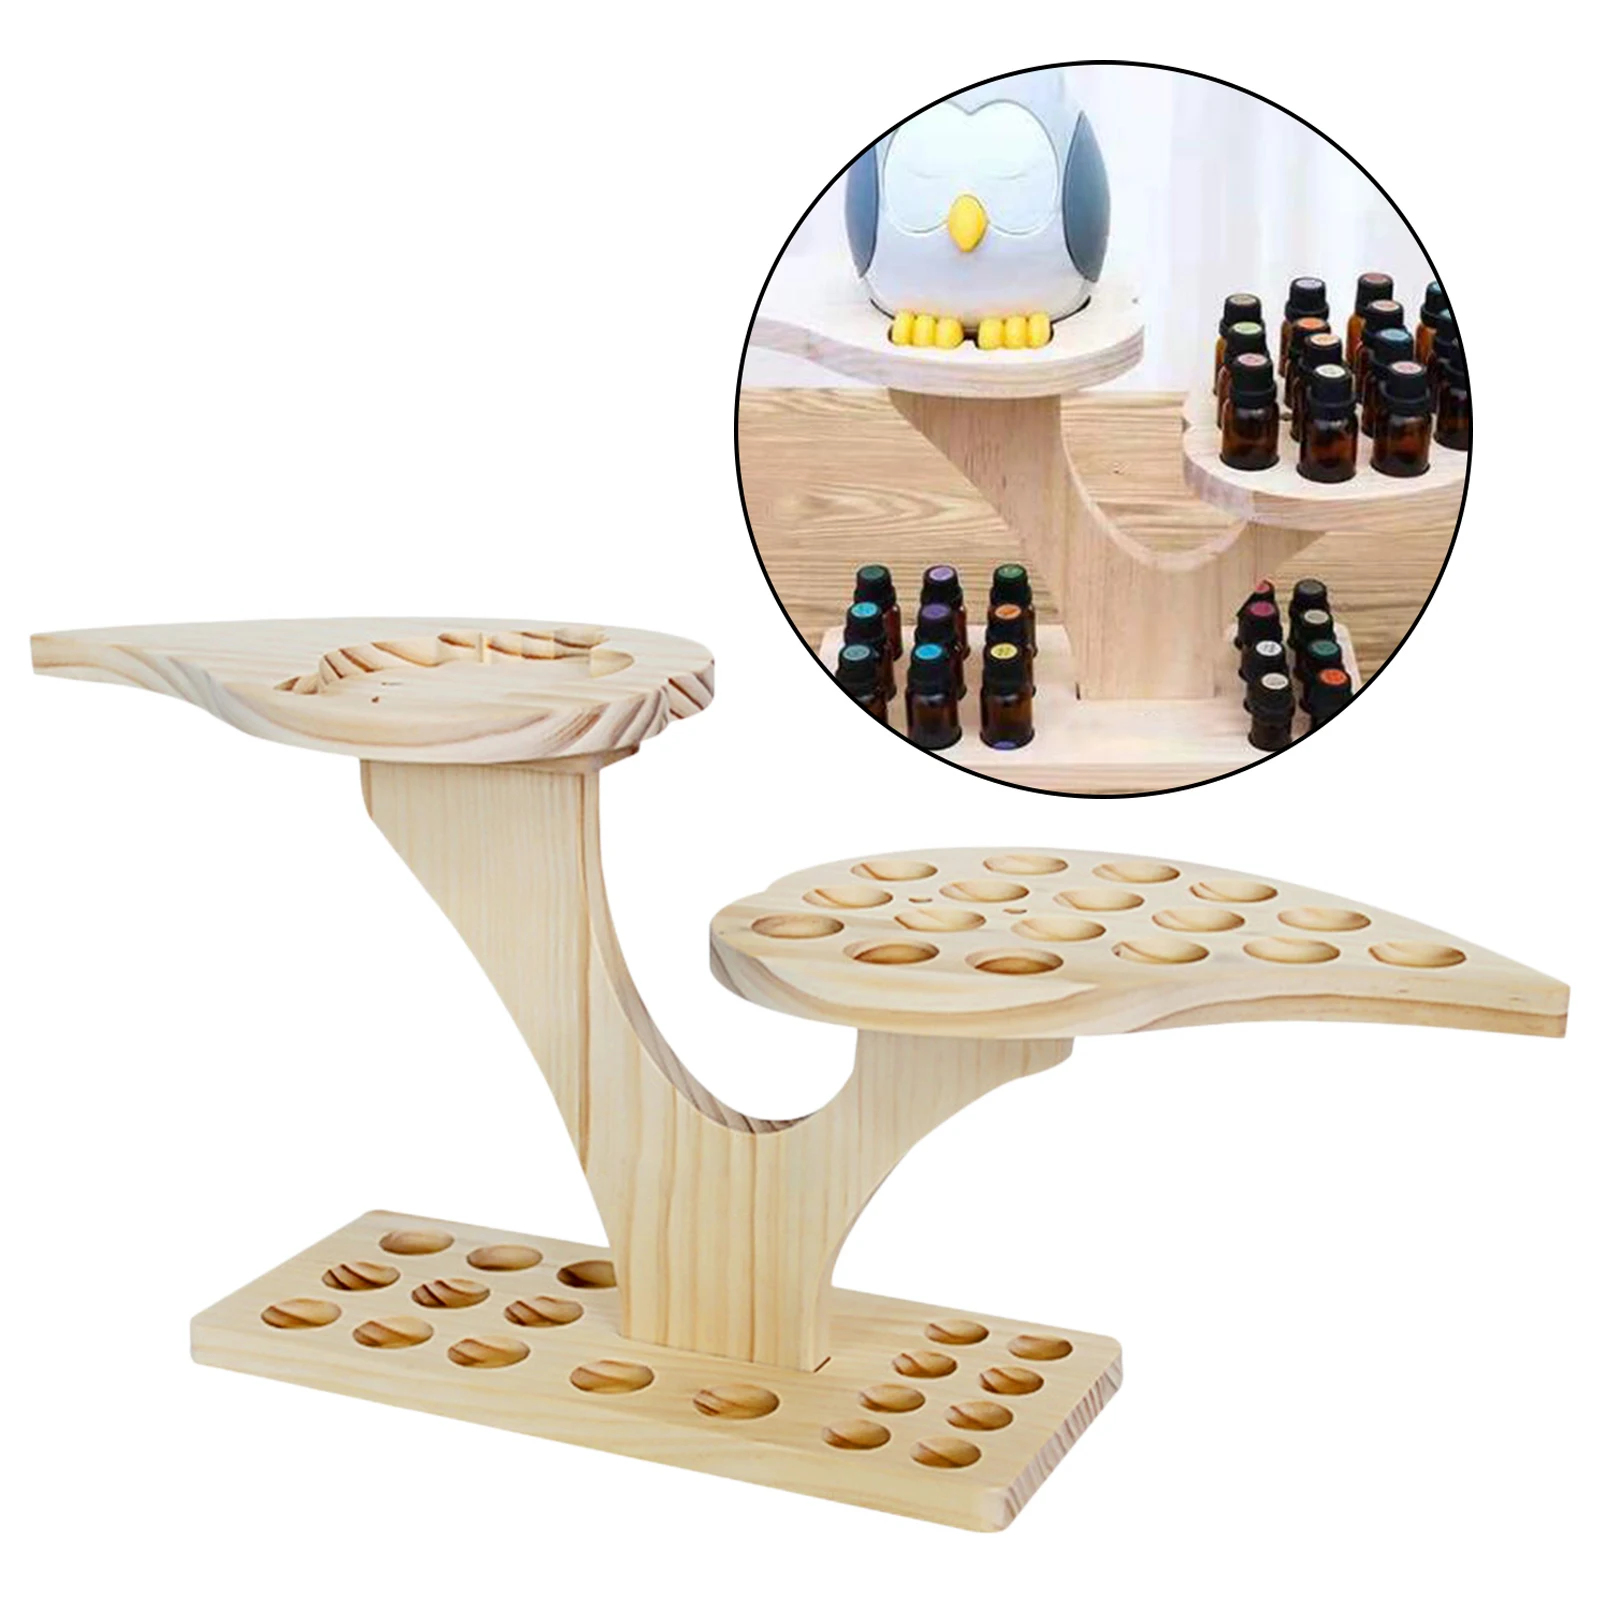 36 Slots Wooden  Oils Stand Diffuser Holder Carousel Box Home Decoration Wood Artwork Case Organizer